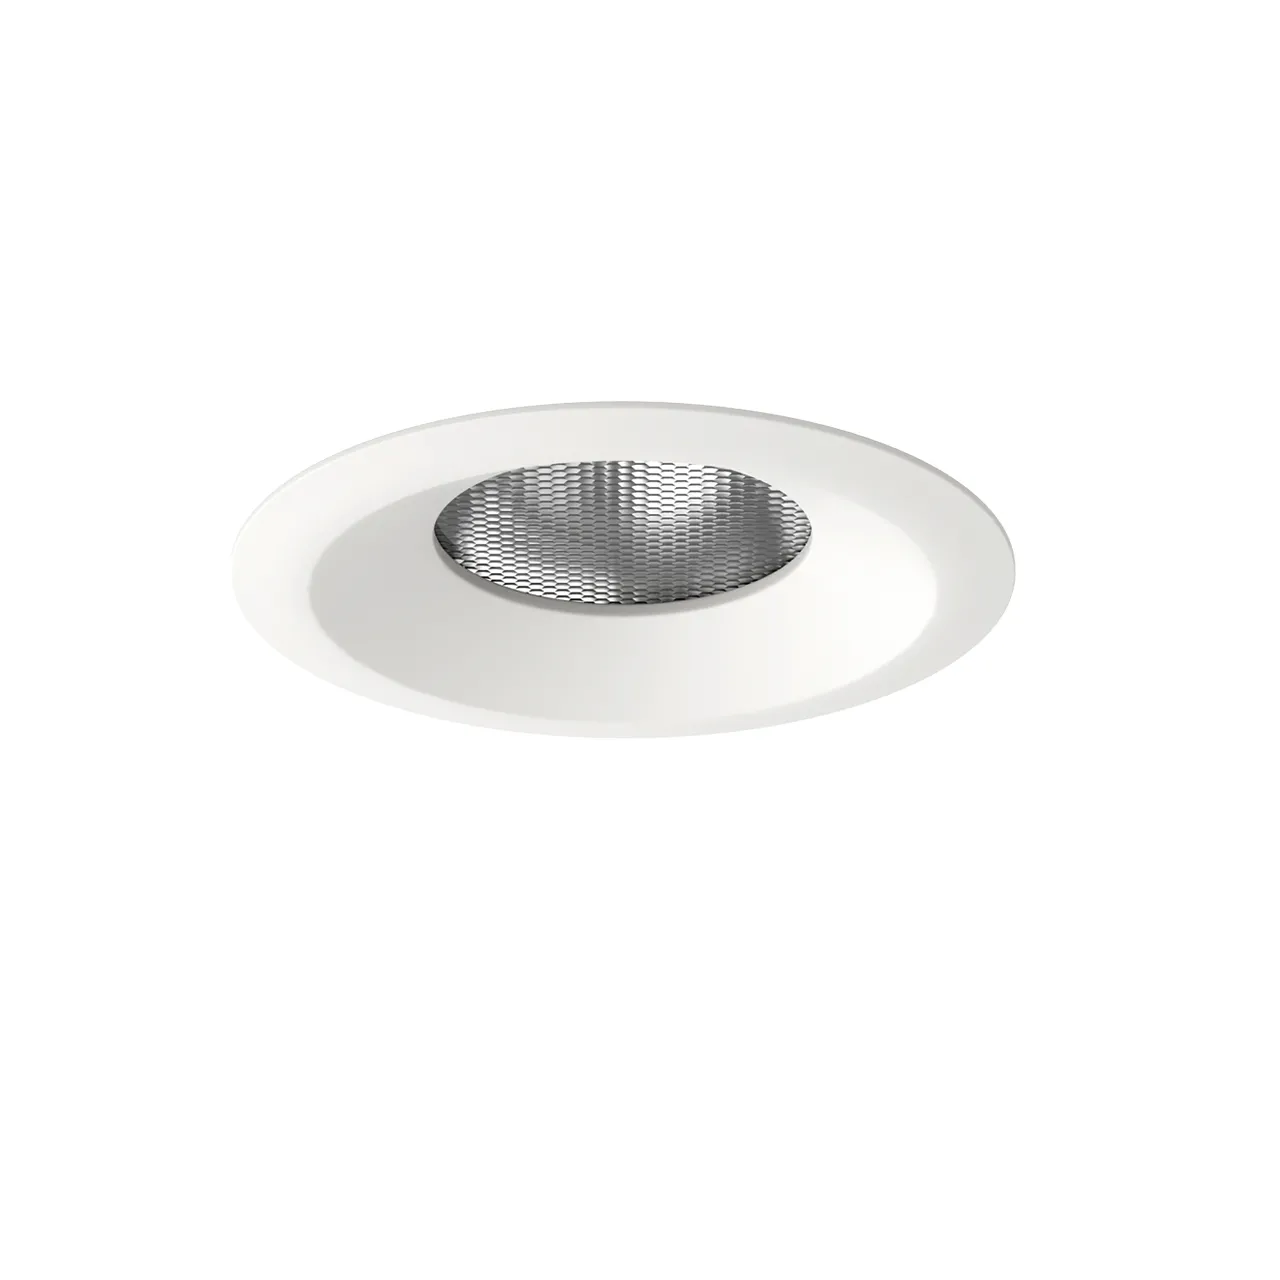 Lighting – came-2.6-recessed-downlight-by-lucelight